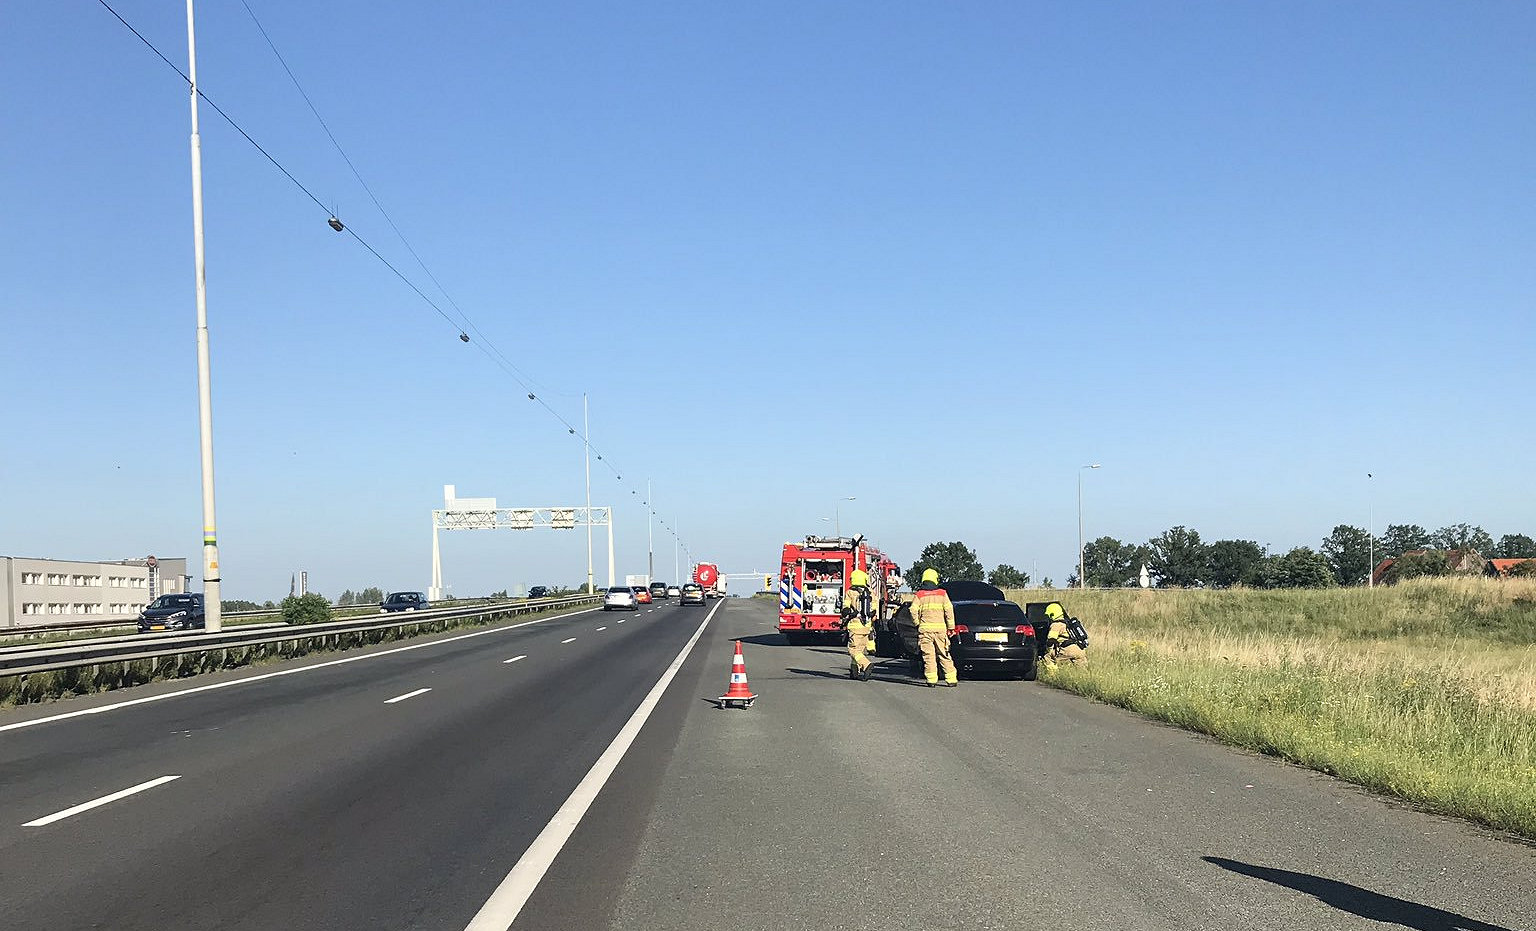 Car fire on 27 June 2019 on the A12 motorway at Duiven)